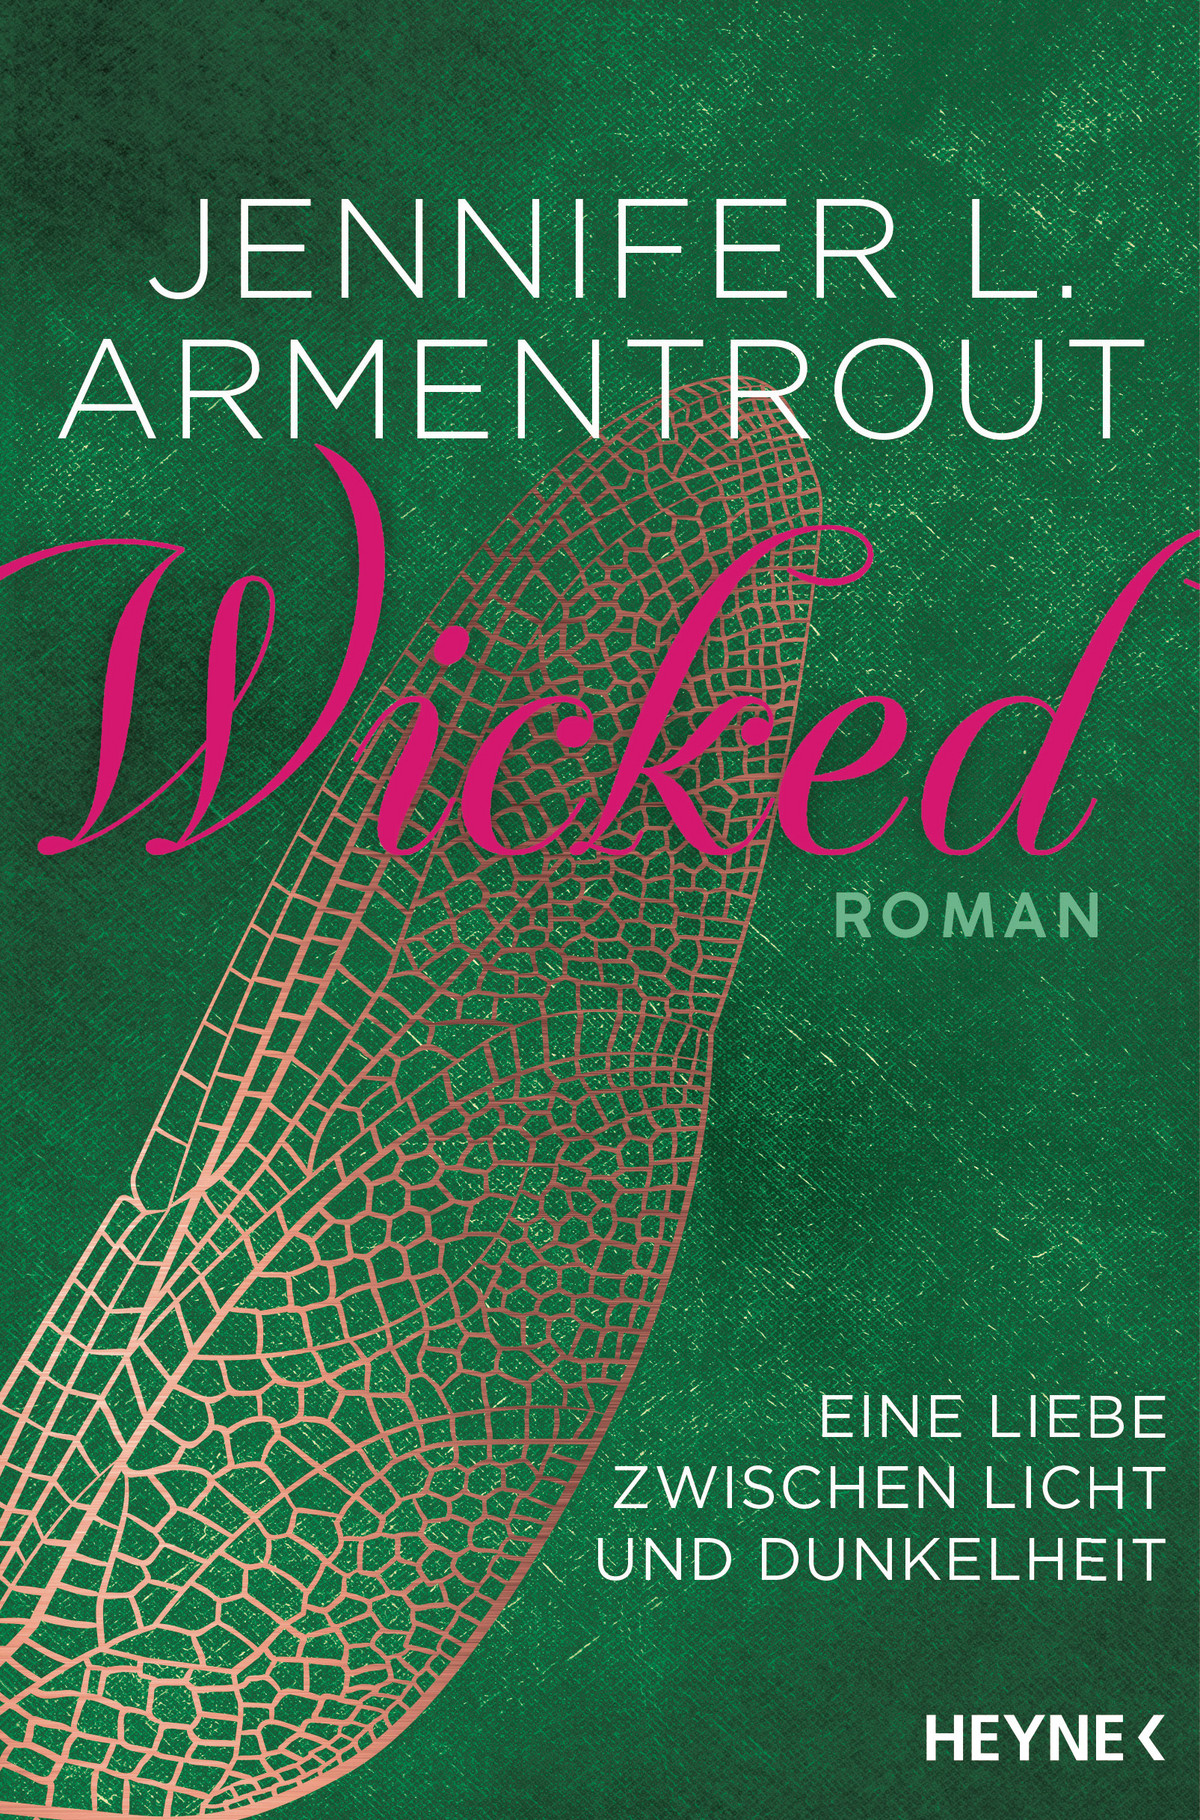 jennifer armentrout wicked series